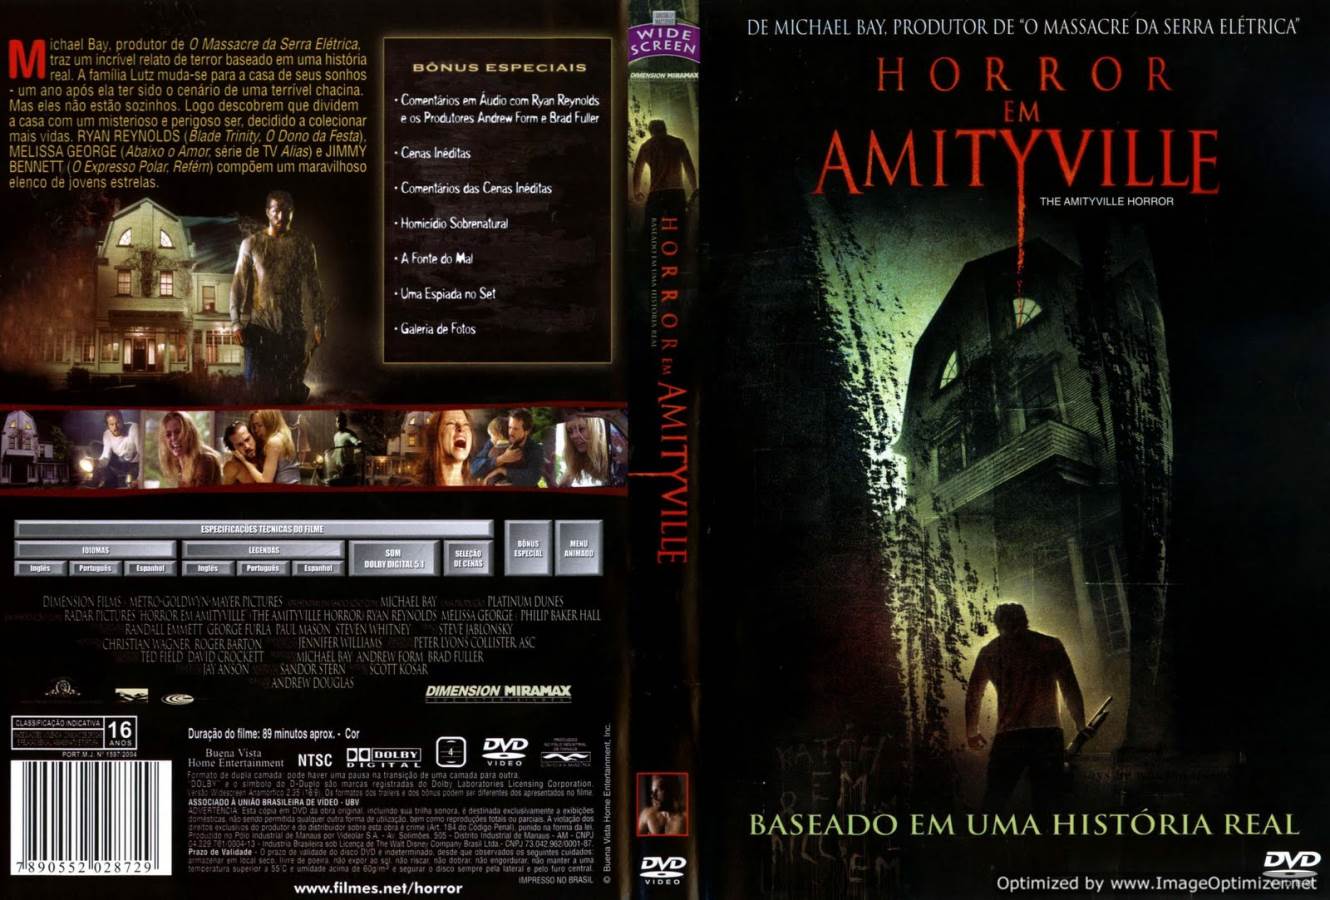 The Amityville Horror (2005) Tamil Dubbed Movie HD 720p Watch Online